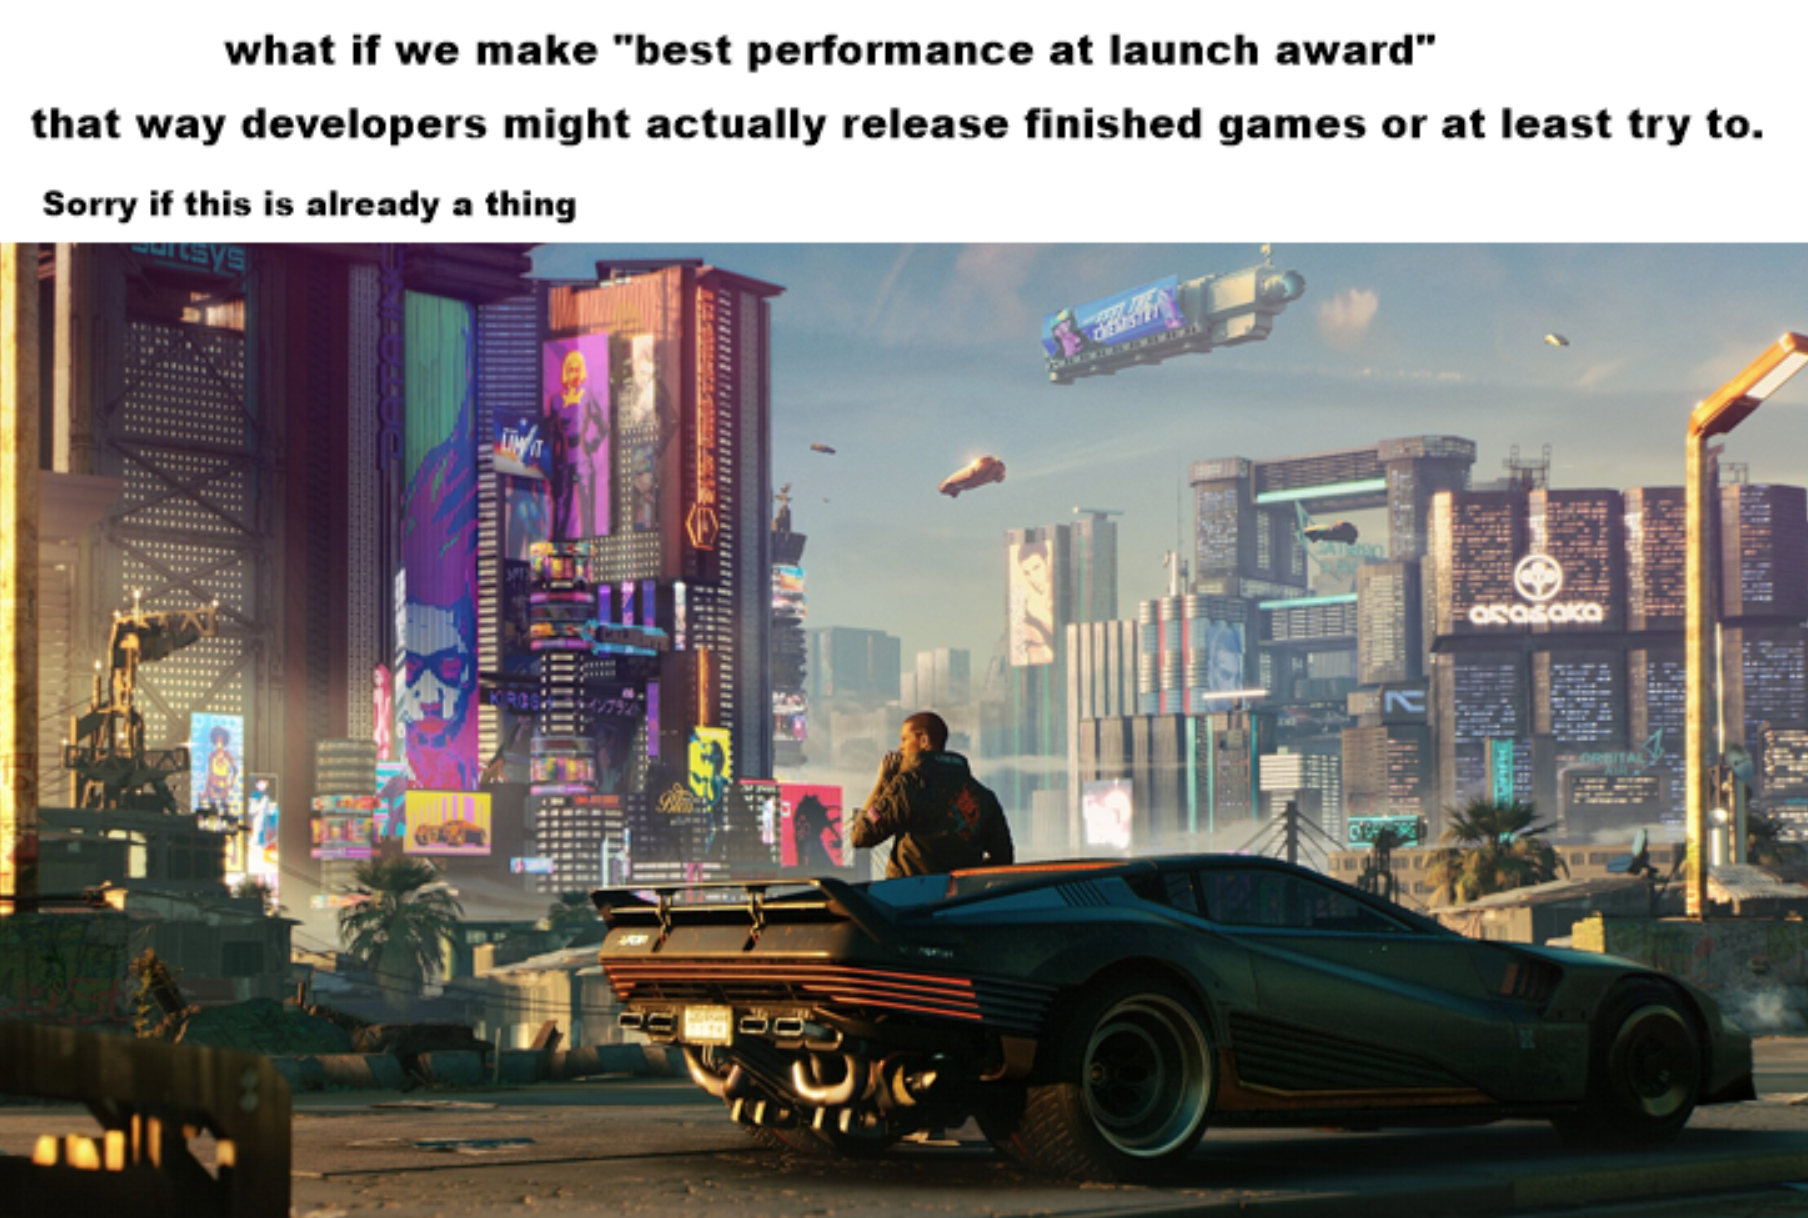 funny gaming memes - cyberpunk 2077 size - what if we make "best performance at launch award" that way developers might actually release finished games or at least try to. Sorry if this is already a thing Liwa Ba Ososoko